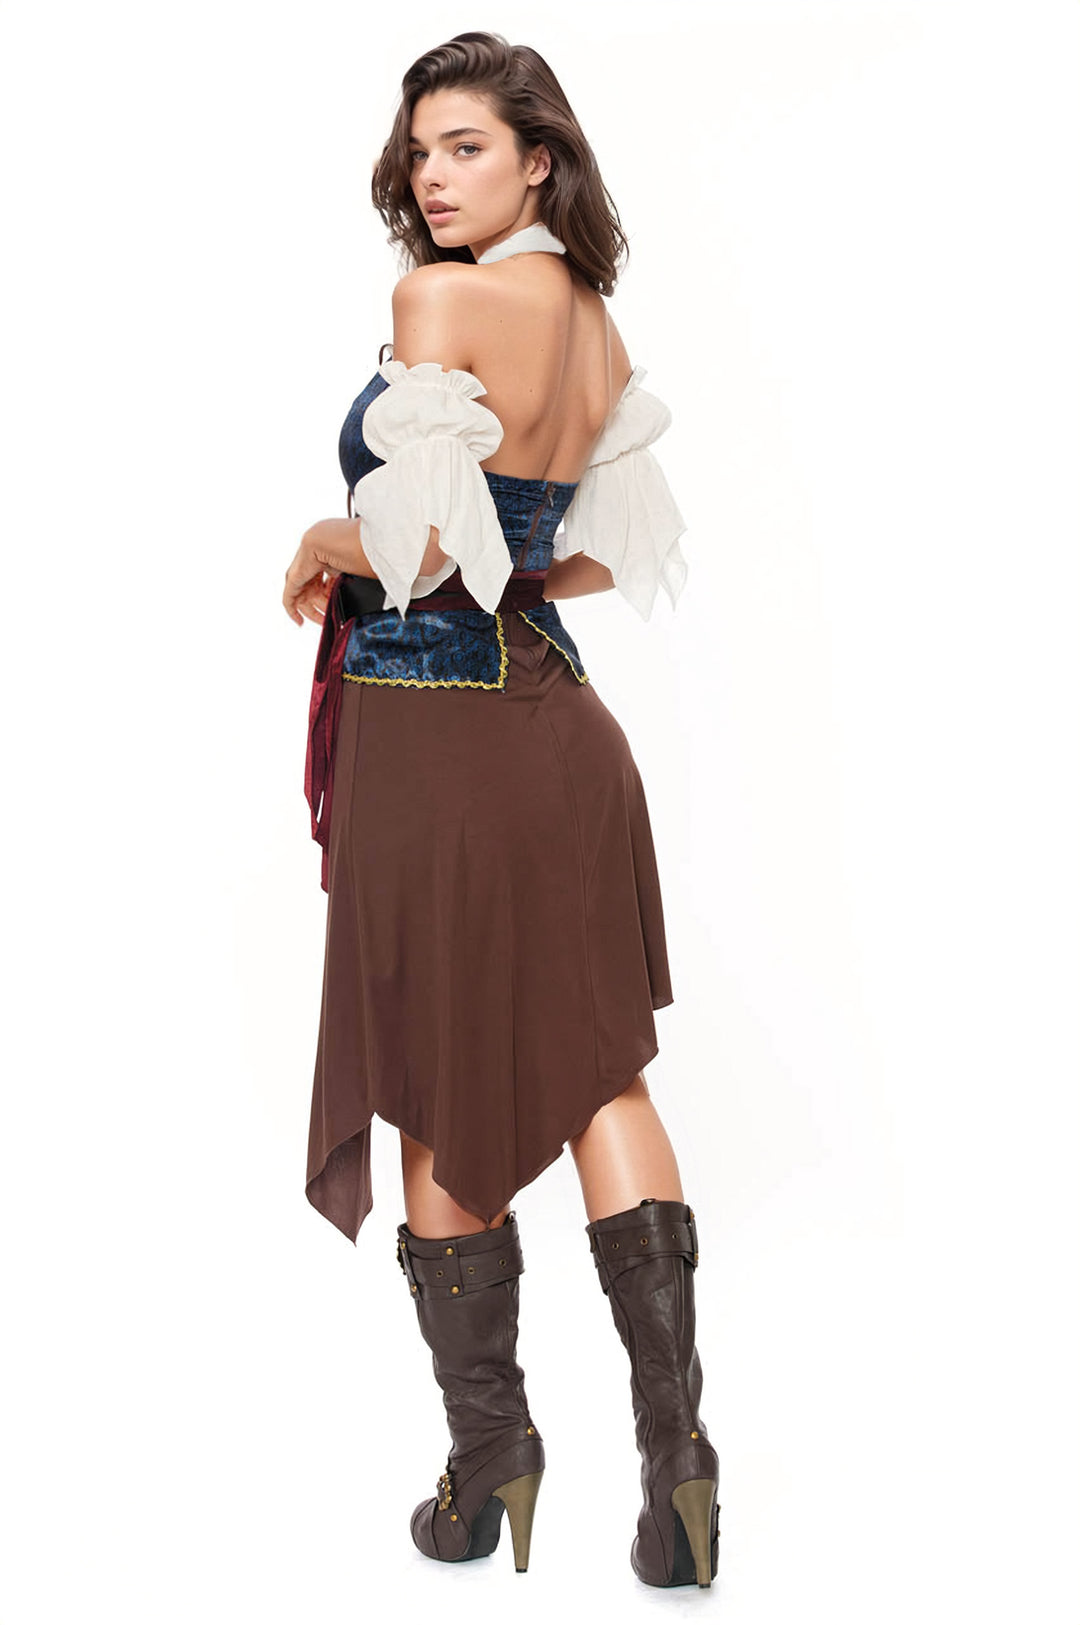 Rogue Pirate Wench Costume